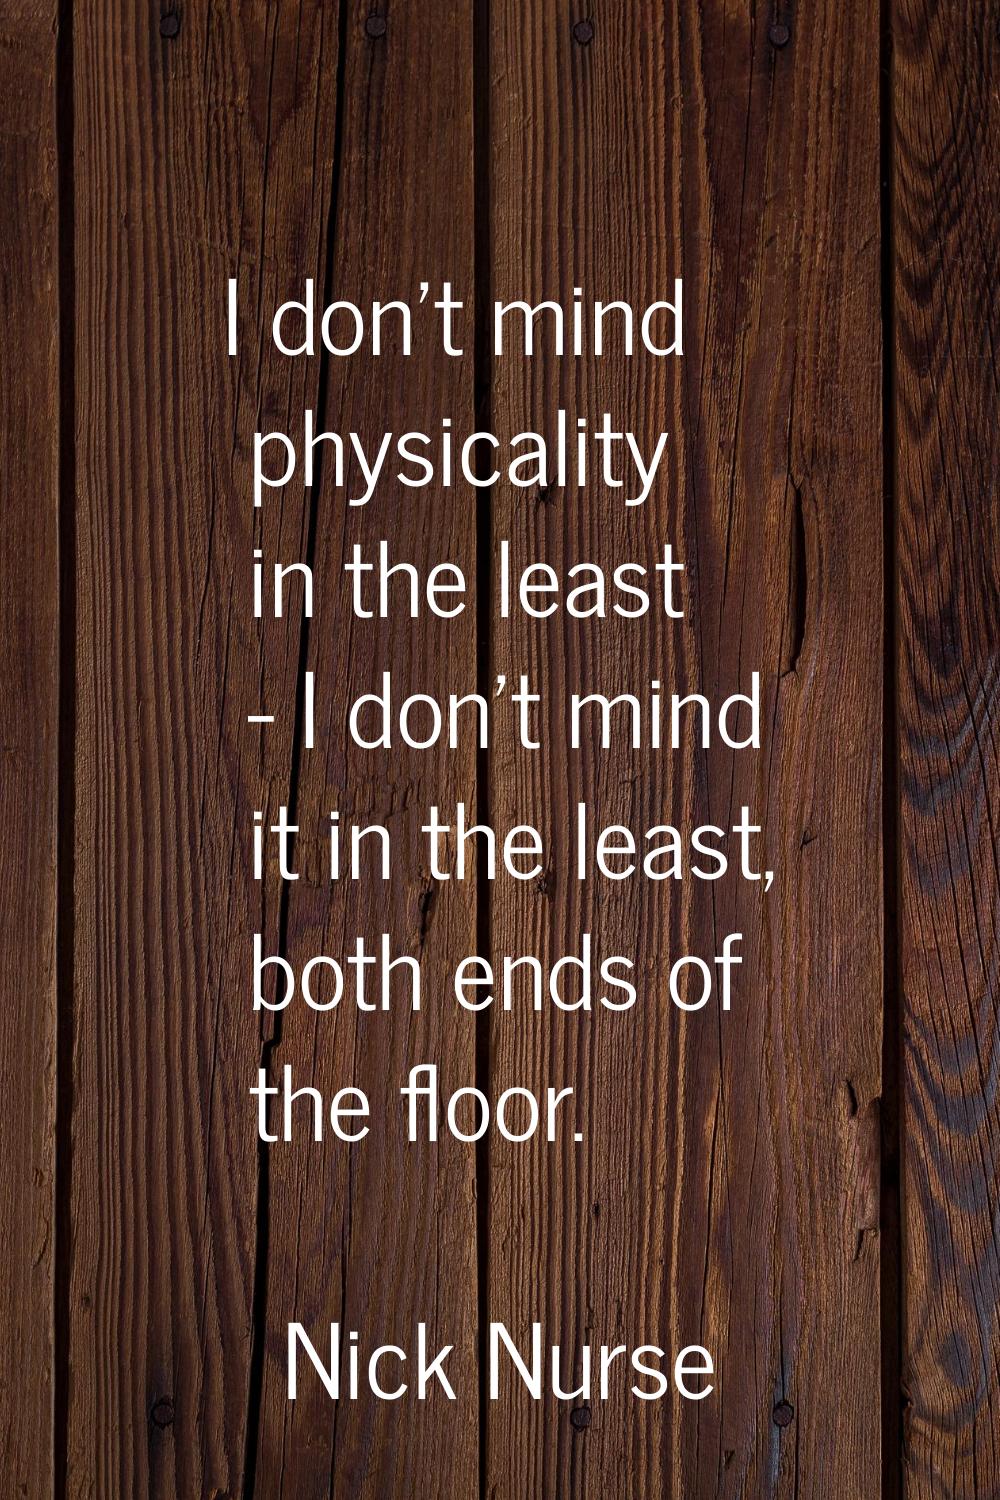 I don't mind physicality in the least - I don't mind it in the least, both ends of the floor.